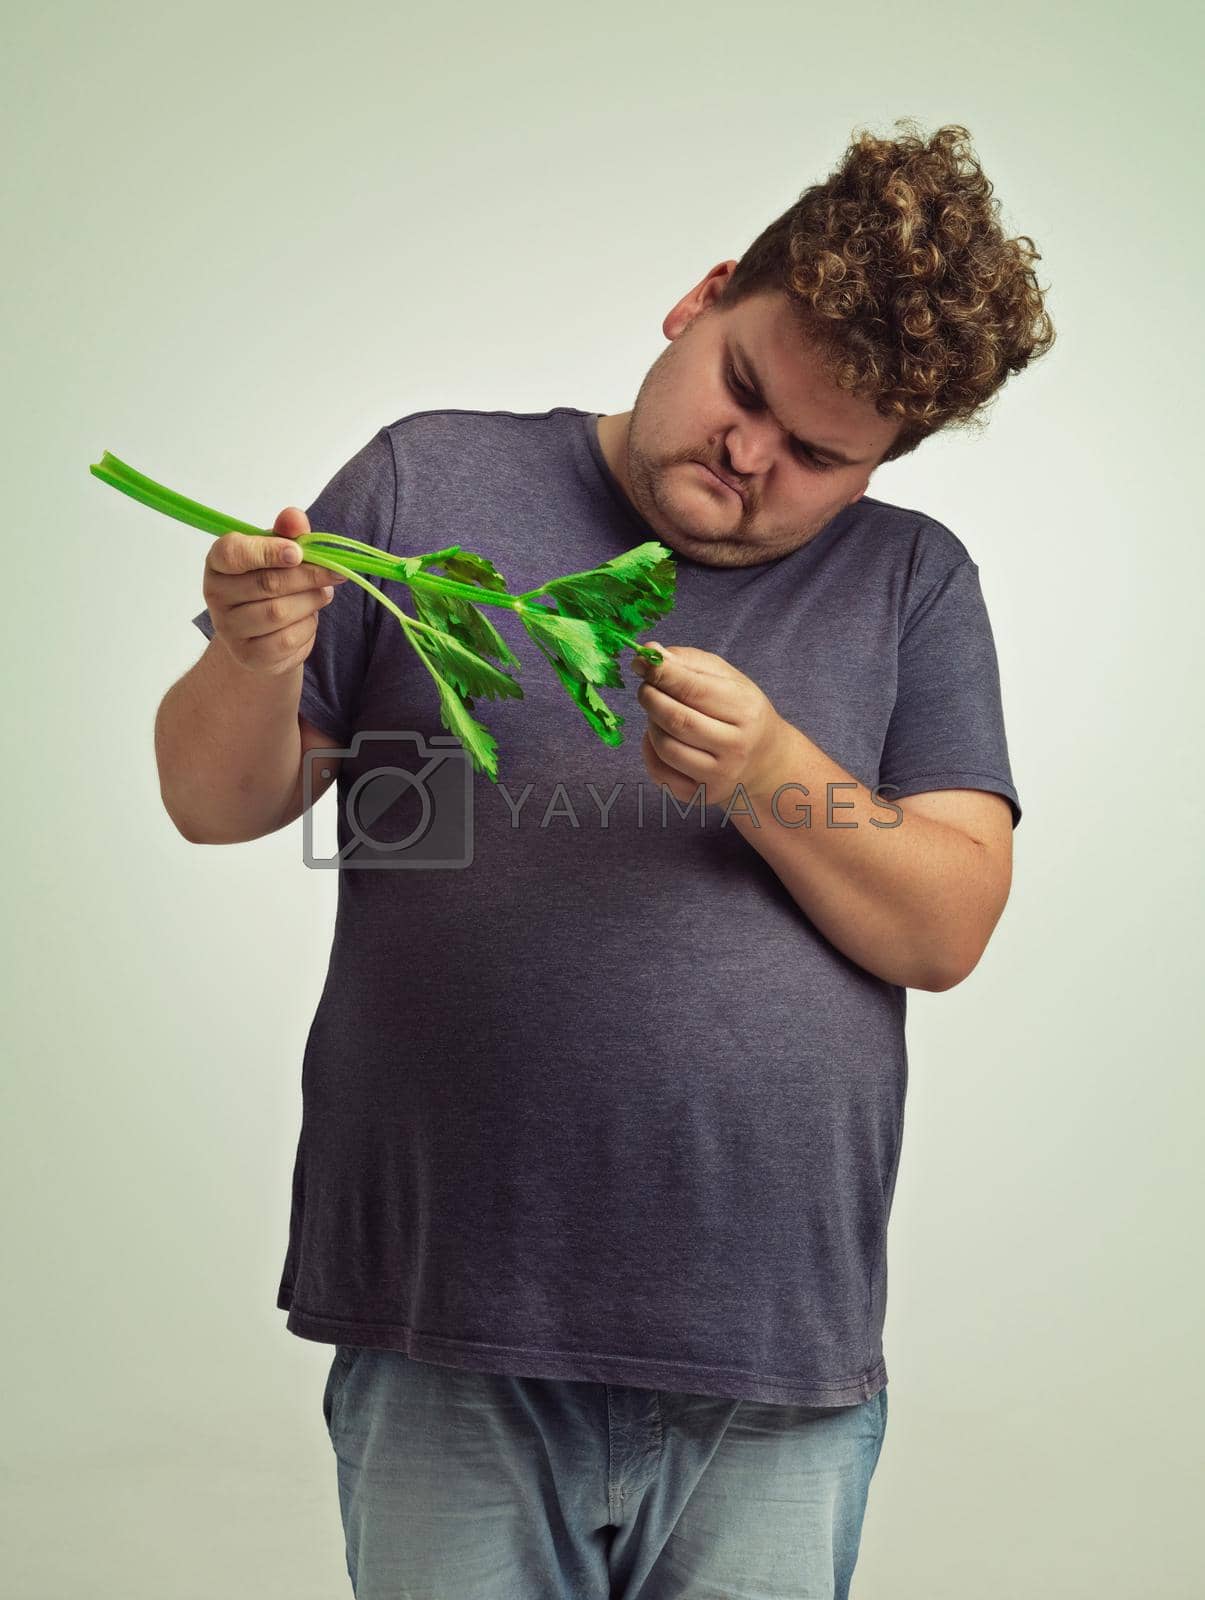 Royalty free image of What is this thing. an unhappy overweight man holding a celery stick. by YuriArcurs